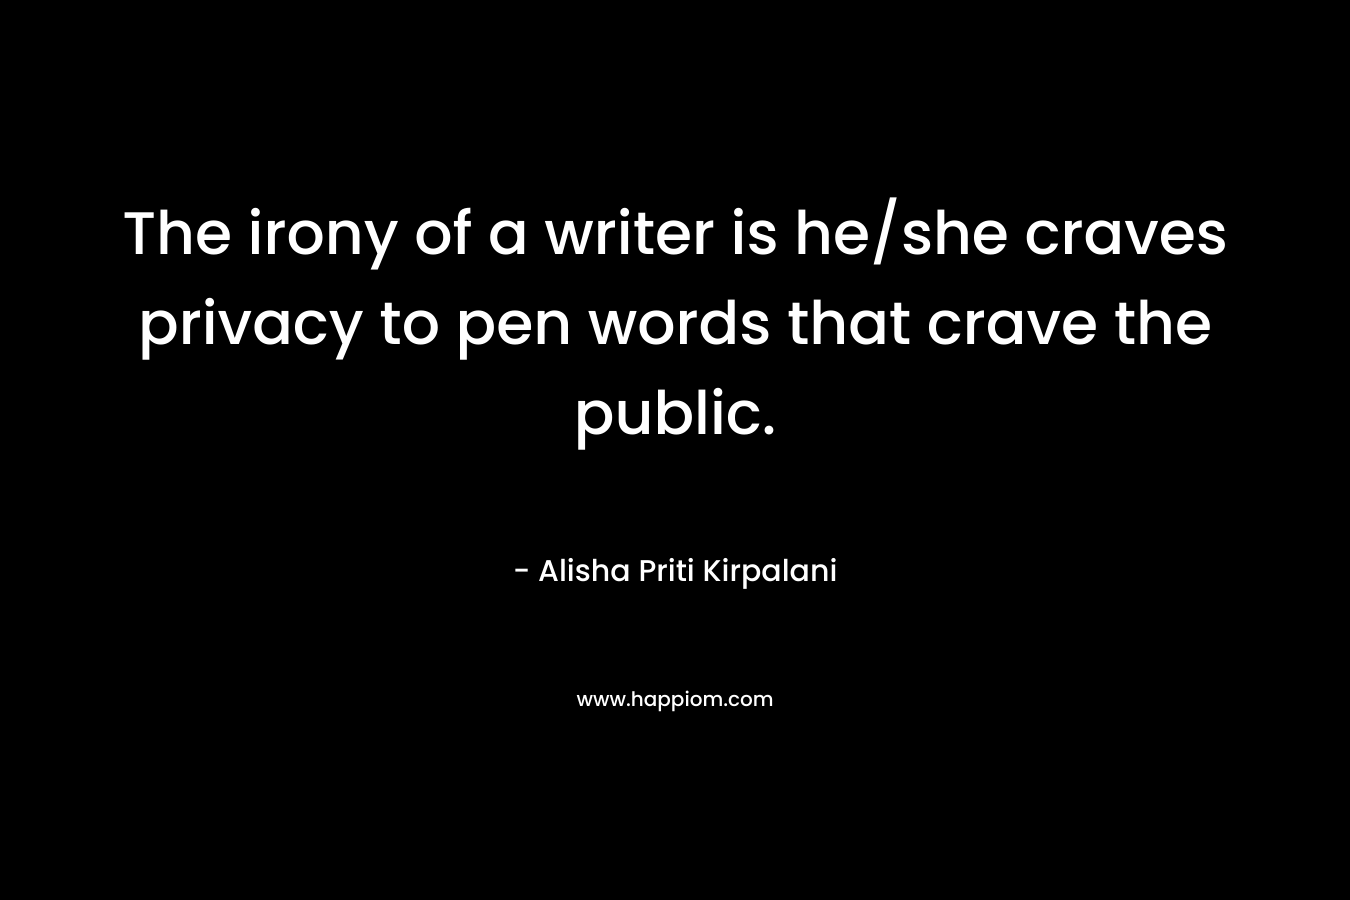 The irony of a writer is he/she craves privacy to pen words that crave the public. – Alisha Priti Kirpalani